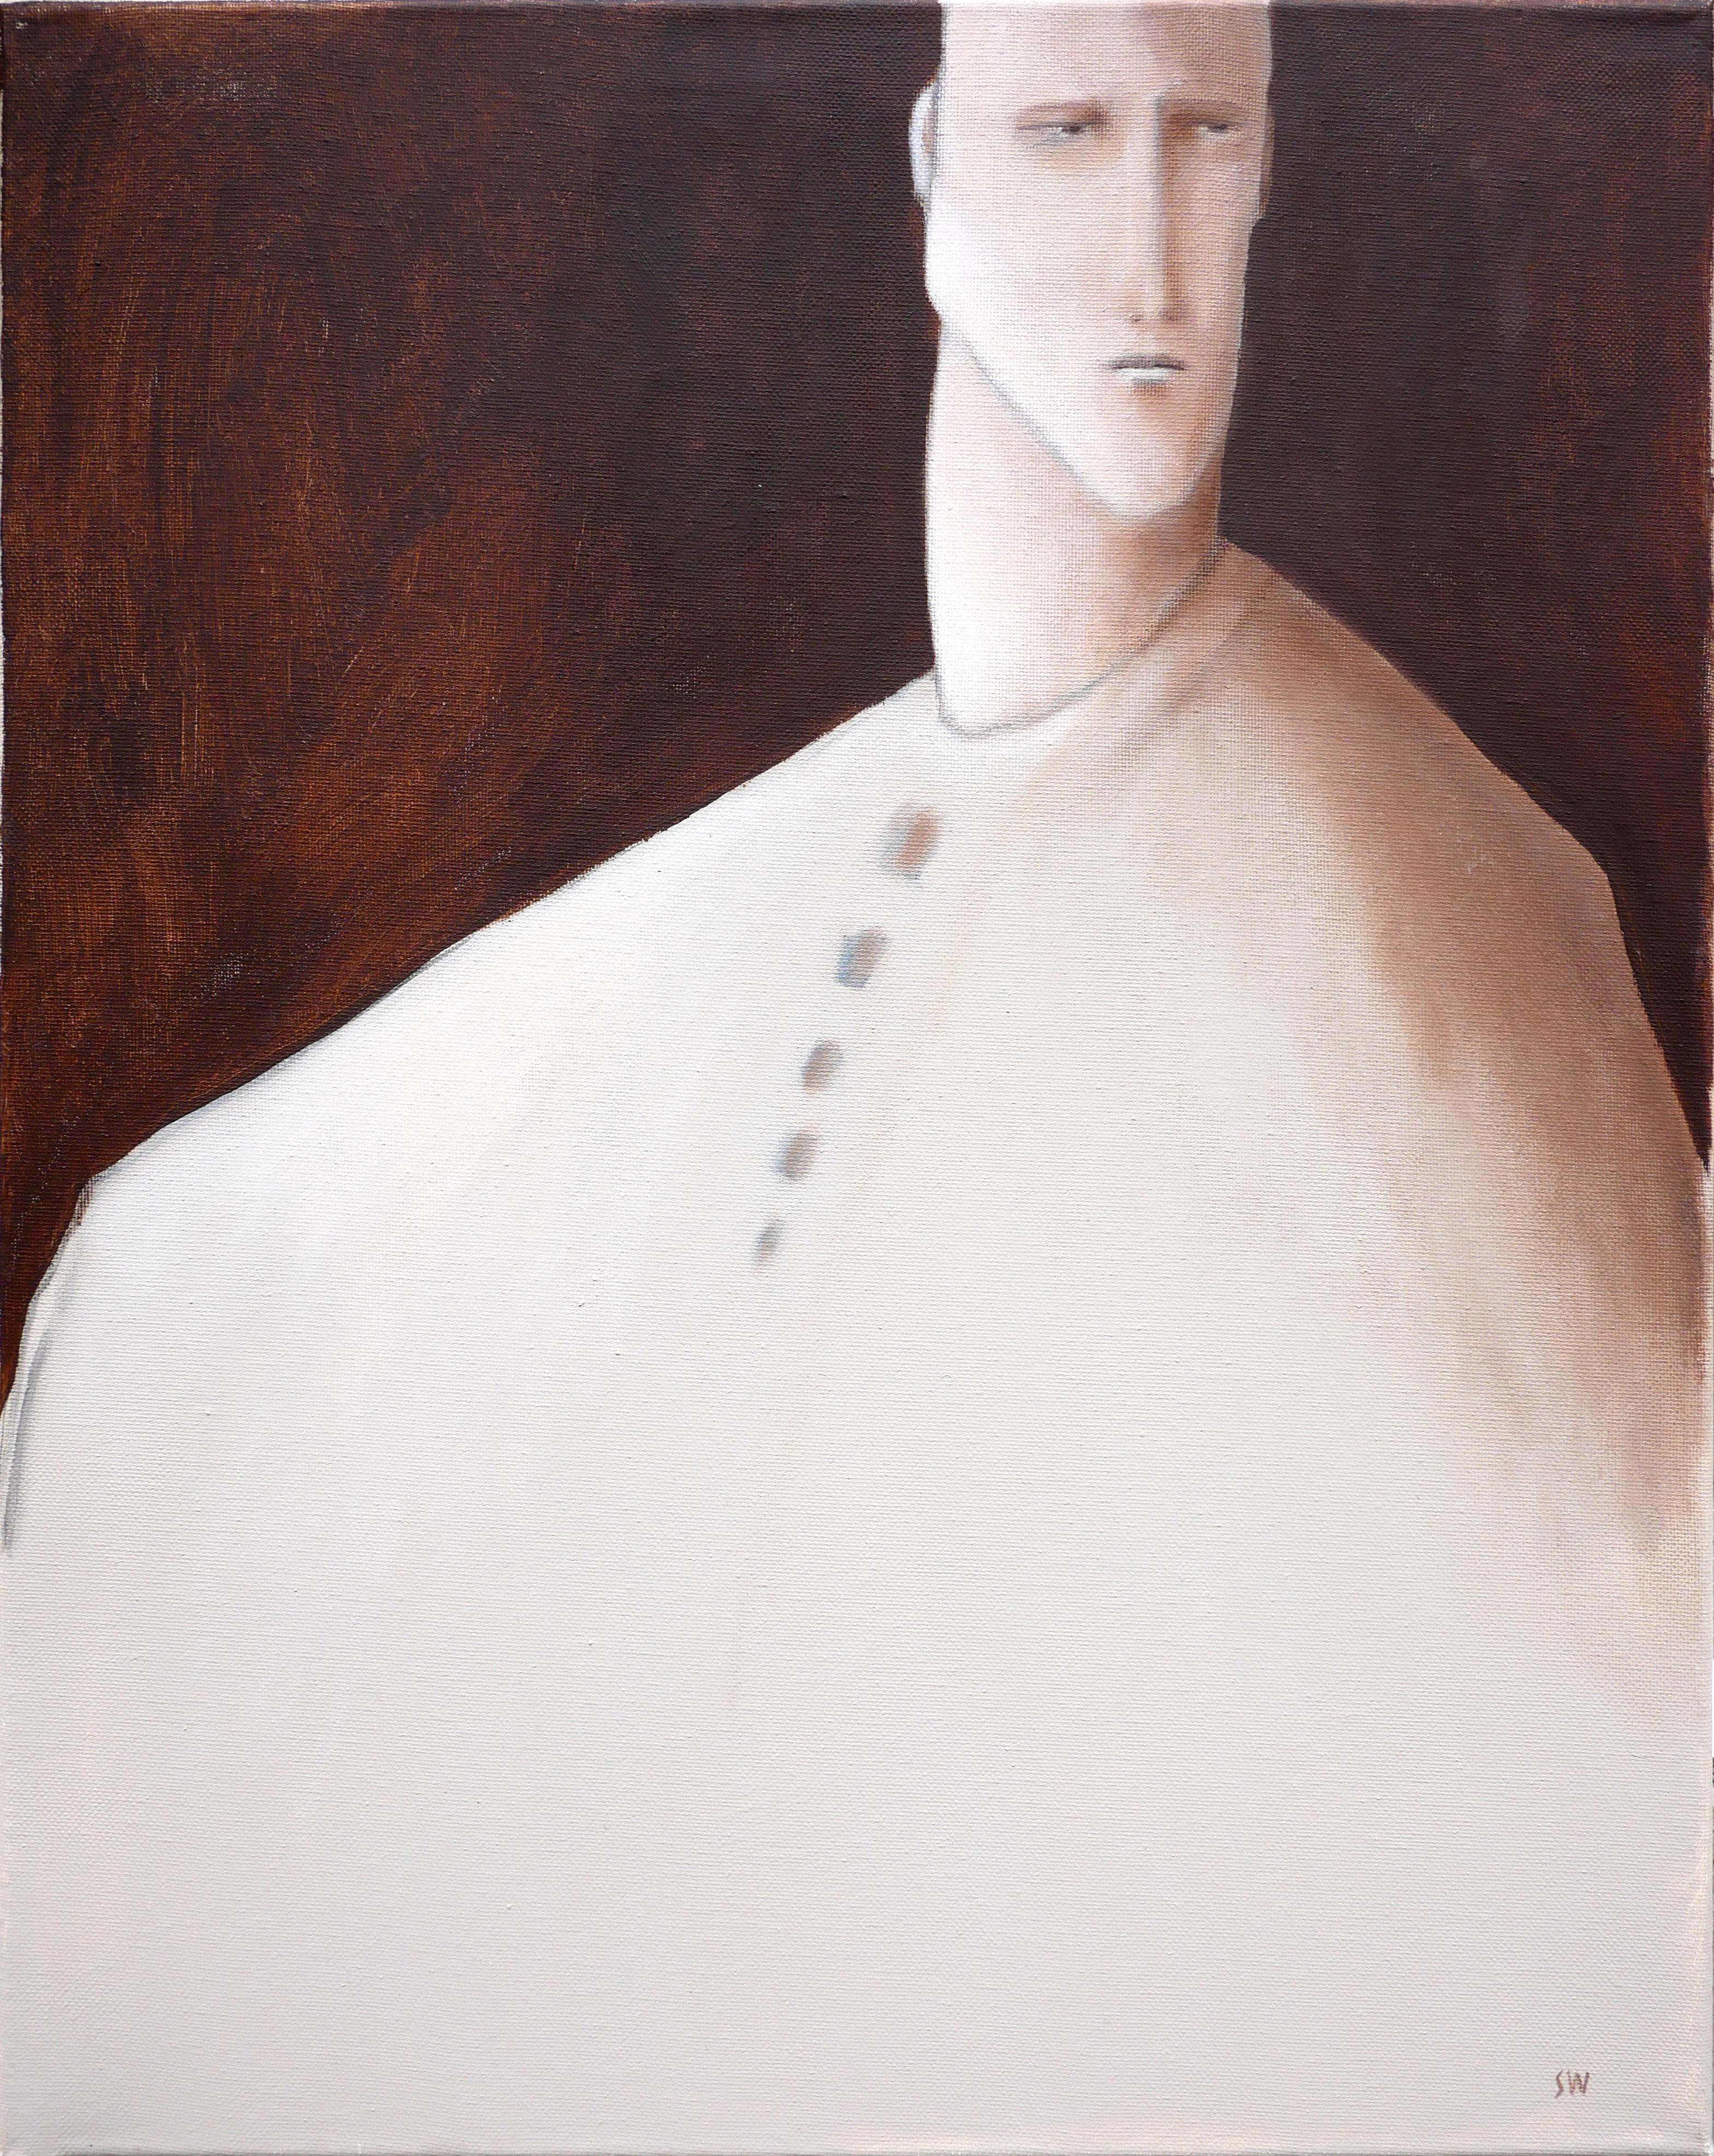 Scott Woodard Figurative Painting - "V" Brown-Toned Monochromatic Contemporary Surrealist Painting of a Gentleman